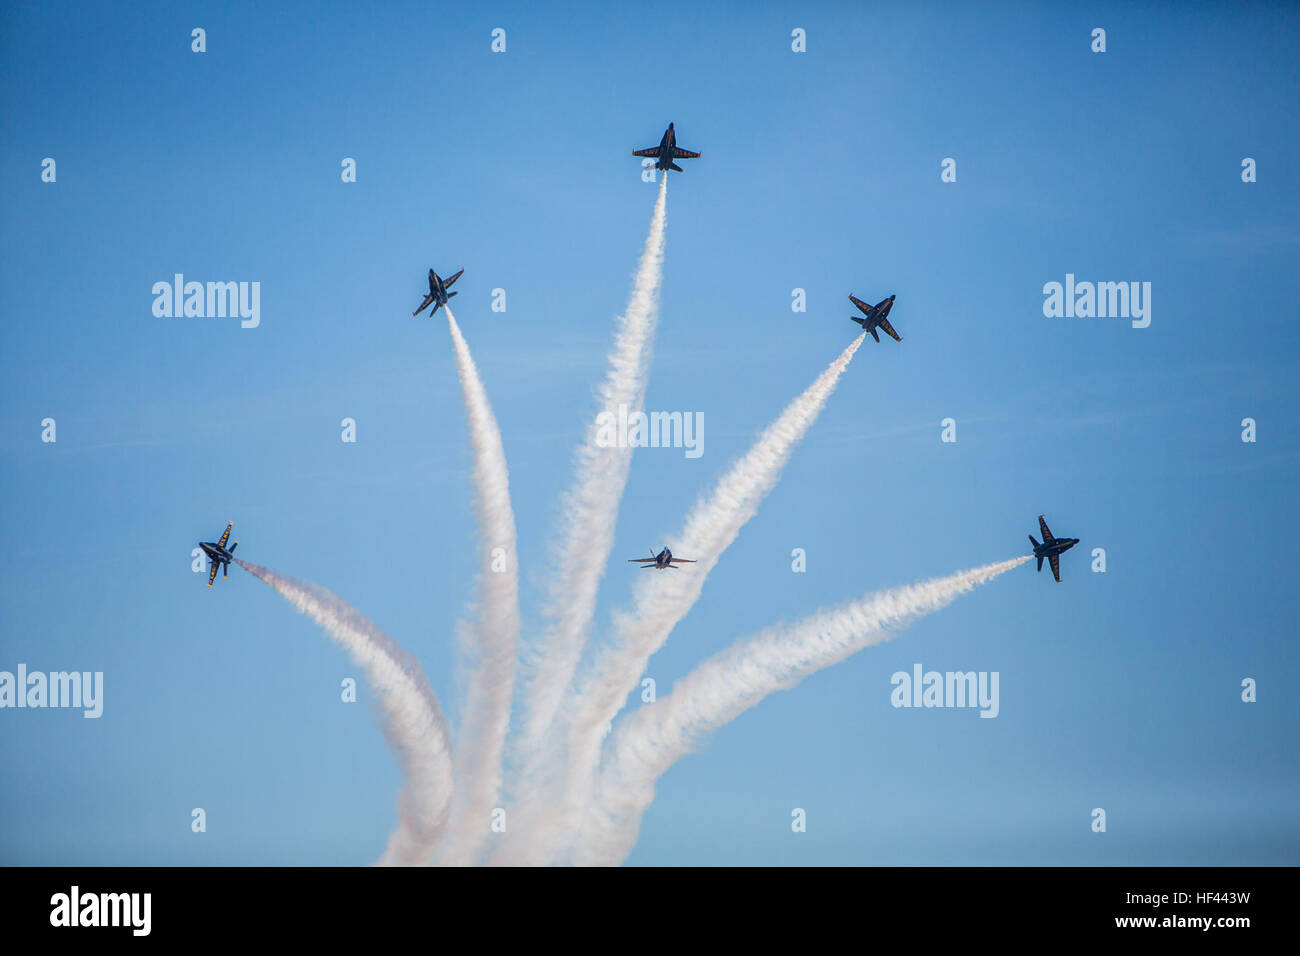 U.S. Navy Blue Angels perform aerobic maneuvers during the 2016 Marine Corps Air Station (MCAS) Miramar Air Show at MCAS Miramar, Calif., Sept. 24, 2016. The MCAS Miramar Air Show honors 100 years of the Marine Corps Reserves by showcasing aerial prowess of the Armed Forces and their appreciation of the civilian community’s support to the troops. (U.S. Marine Corps photo By Corporal Jessica Y. Lucio/Released) MCAS Miramar Air Show 160924-M-UX416-051 Stock Photo